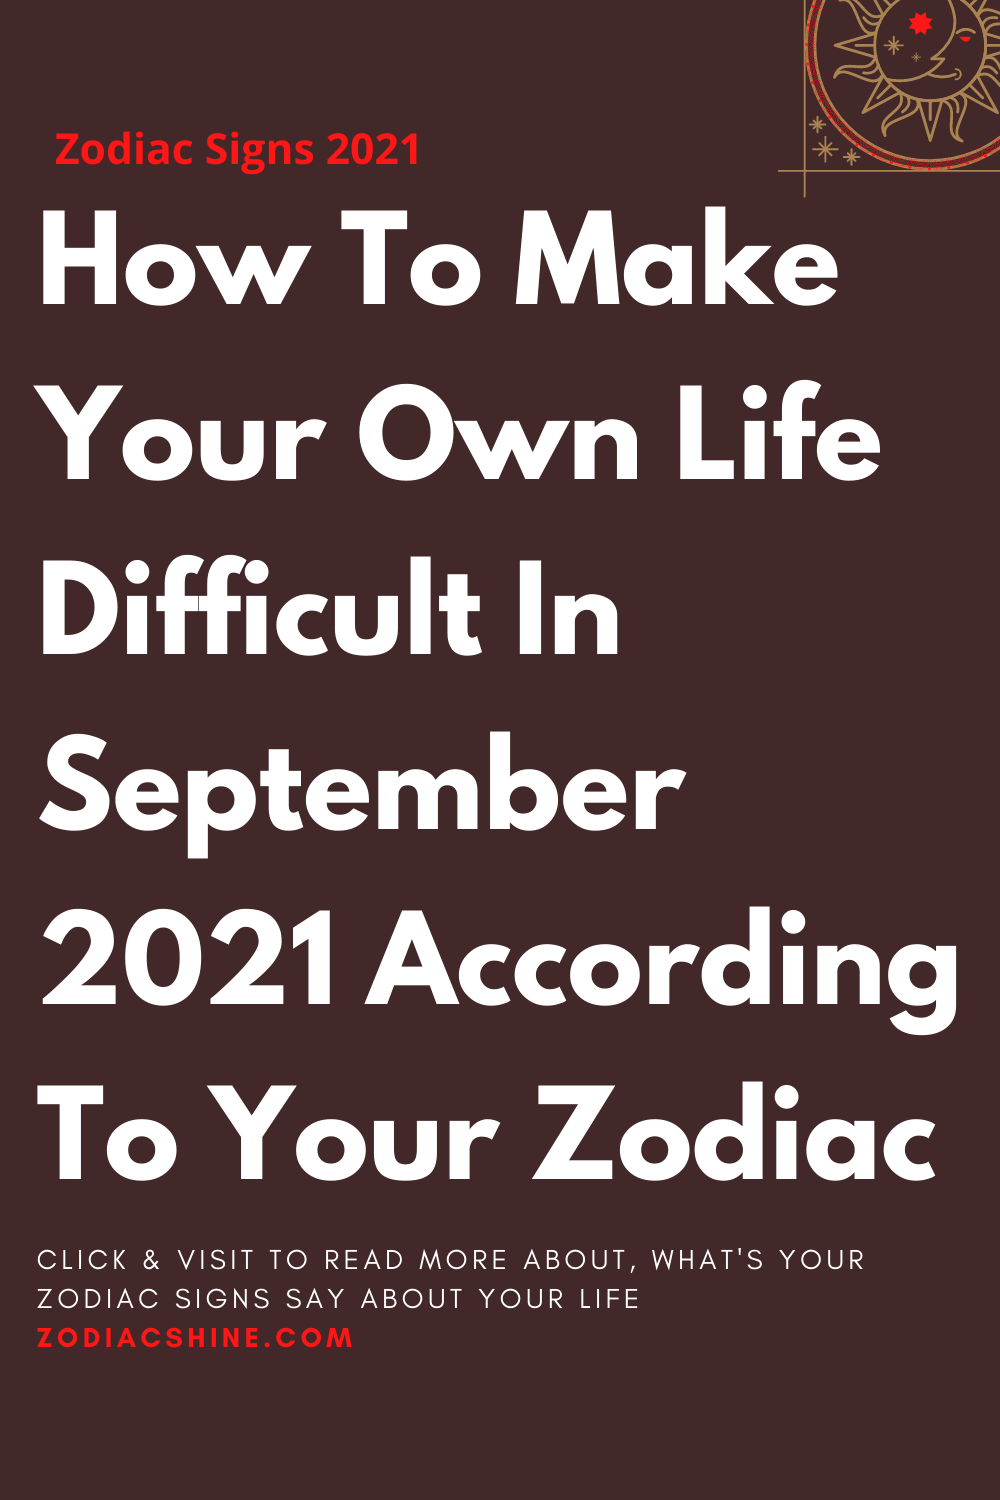 How To Make Your Own Life Difficult In September 2021 According To Your Zodiac